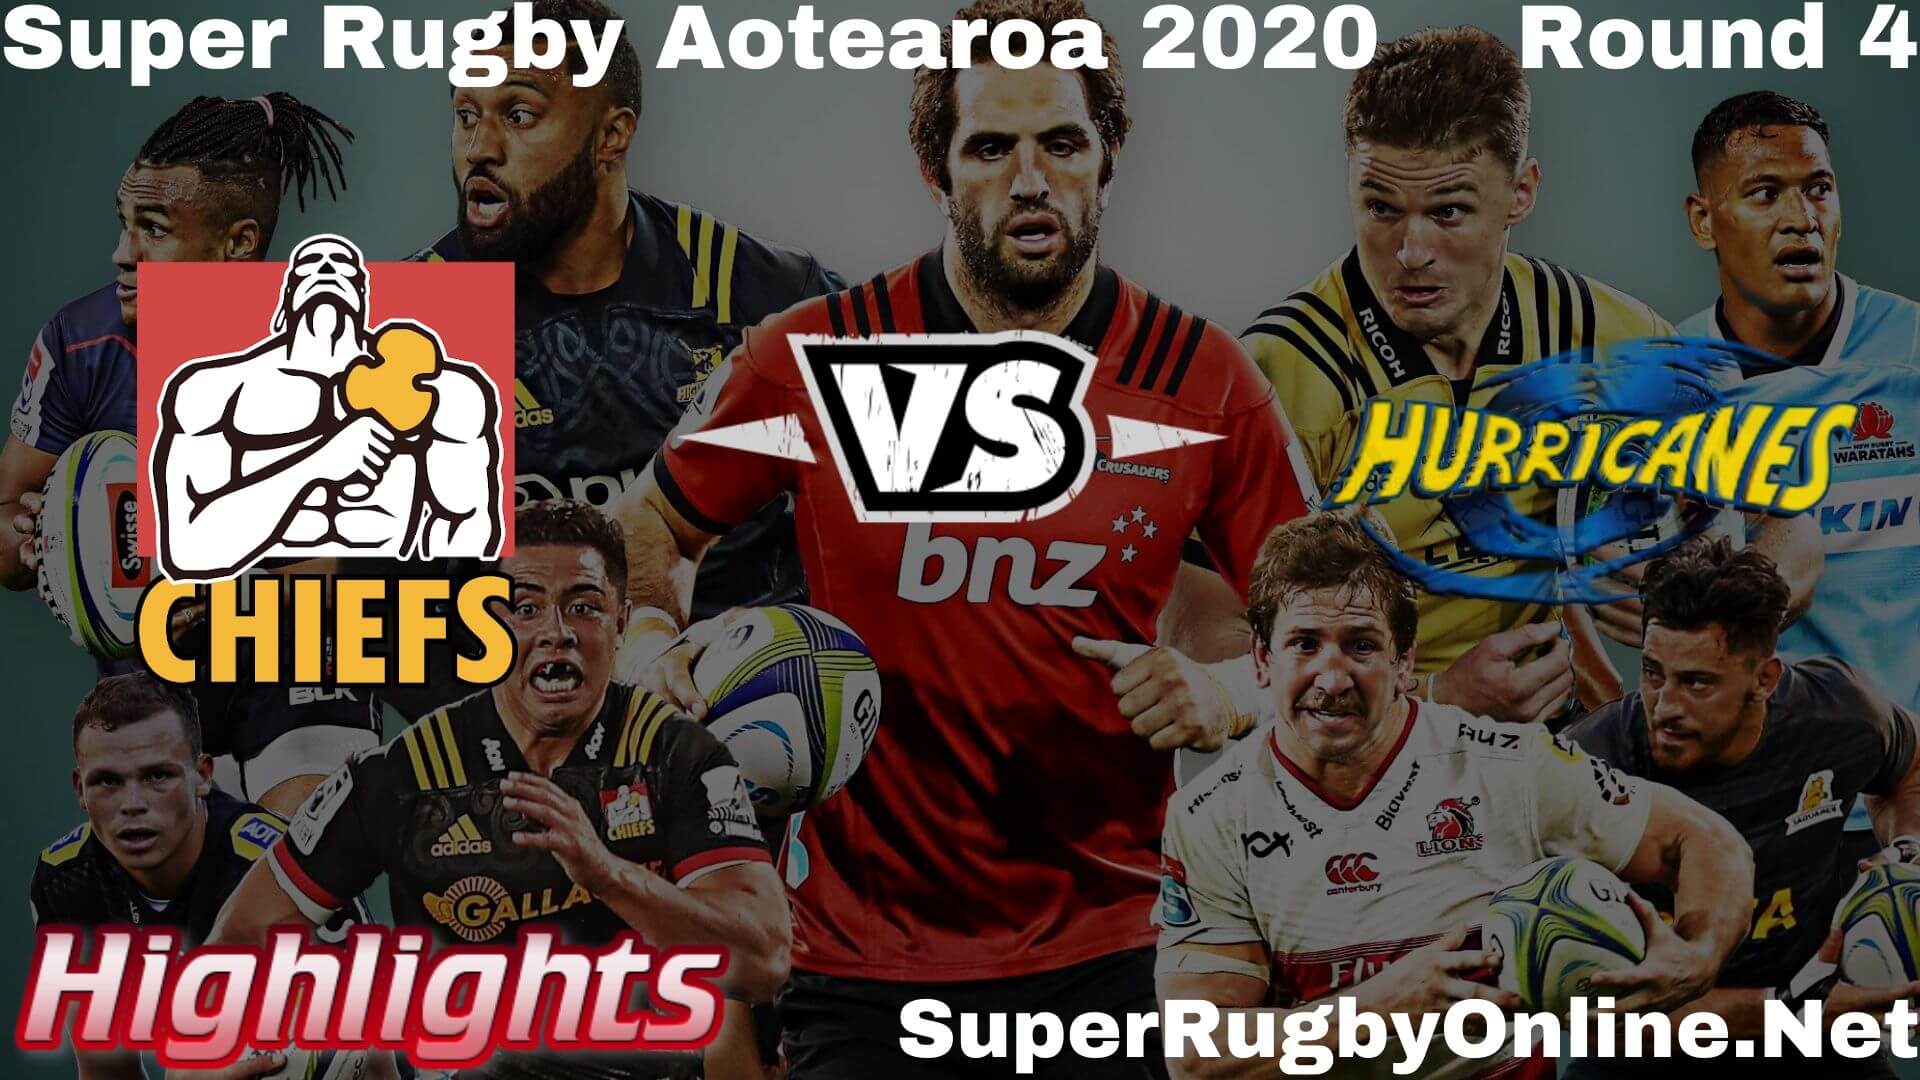 Chiefs Vs Hurricanes Highlights 2020 Rd 4 Super Rugby